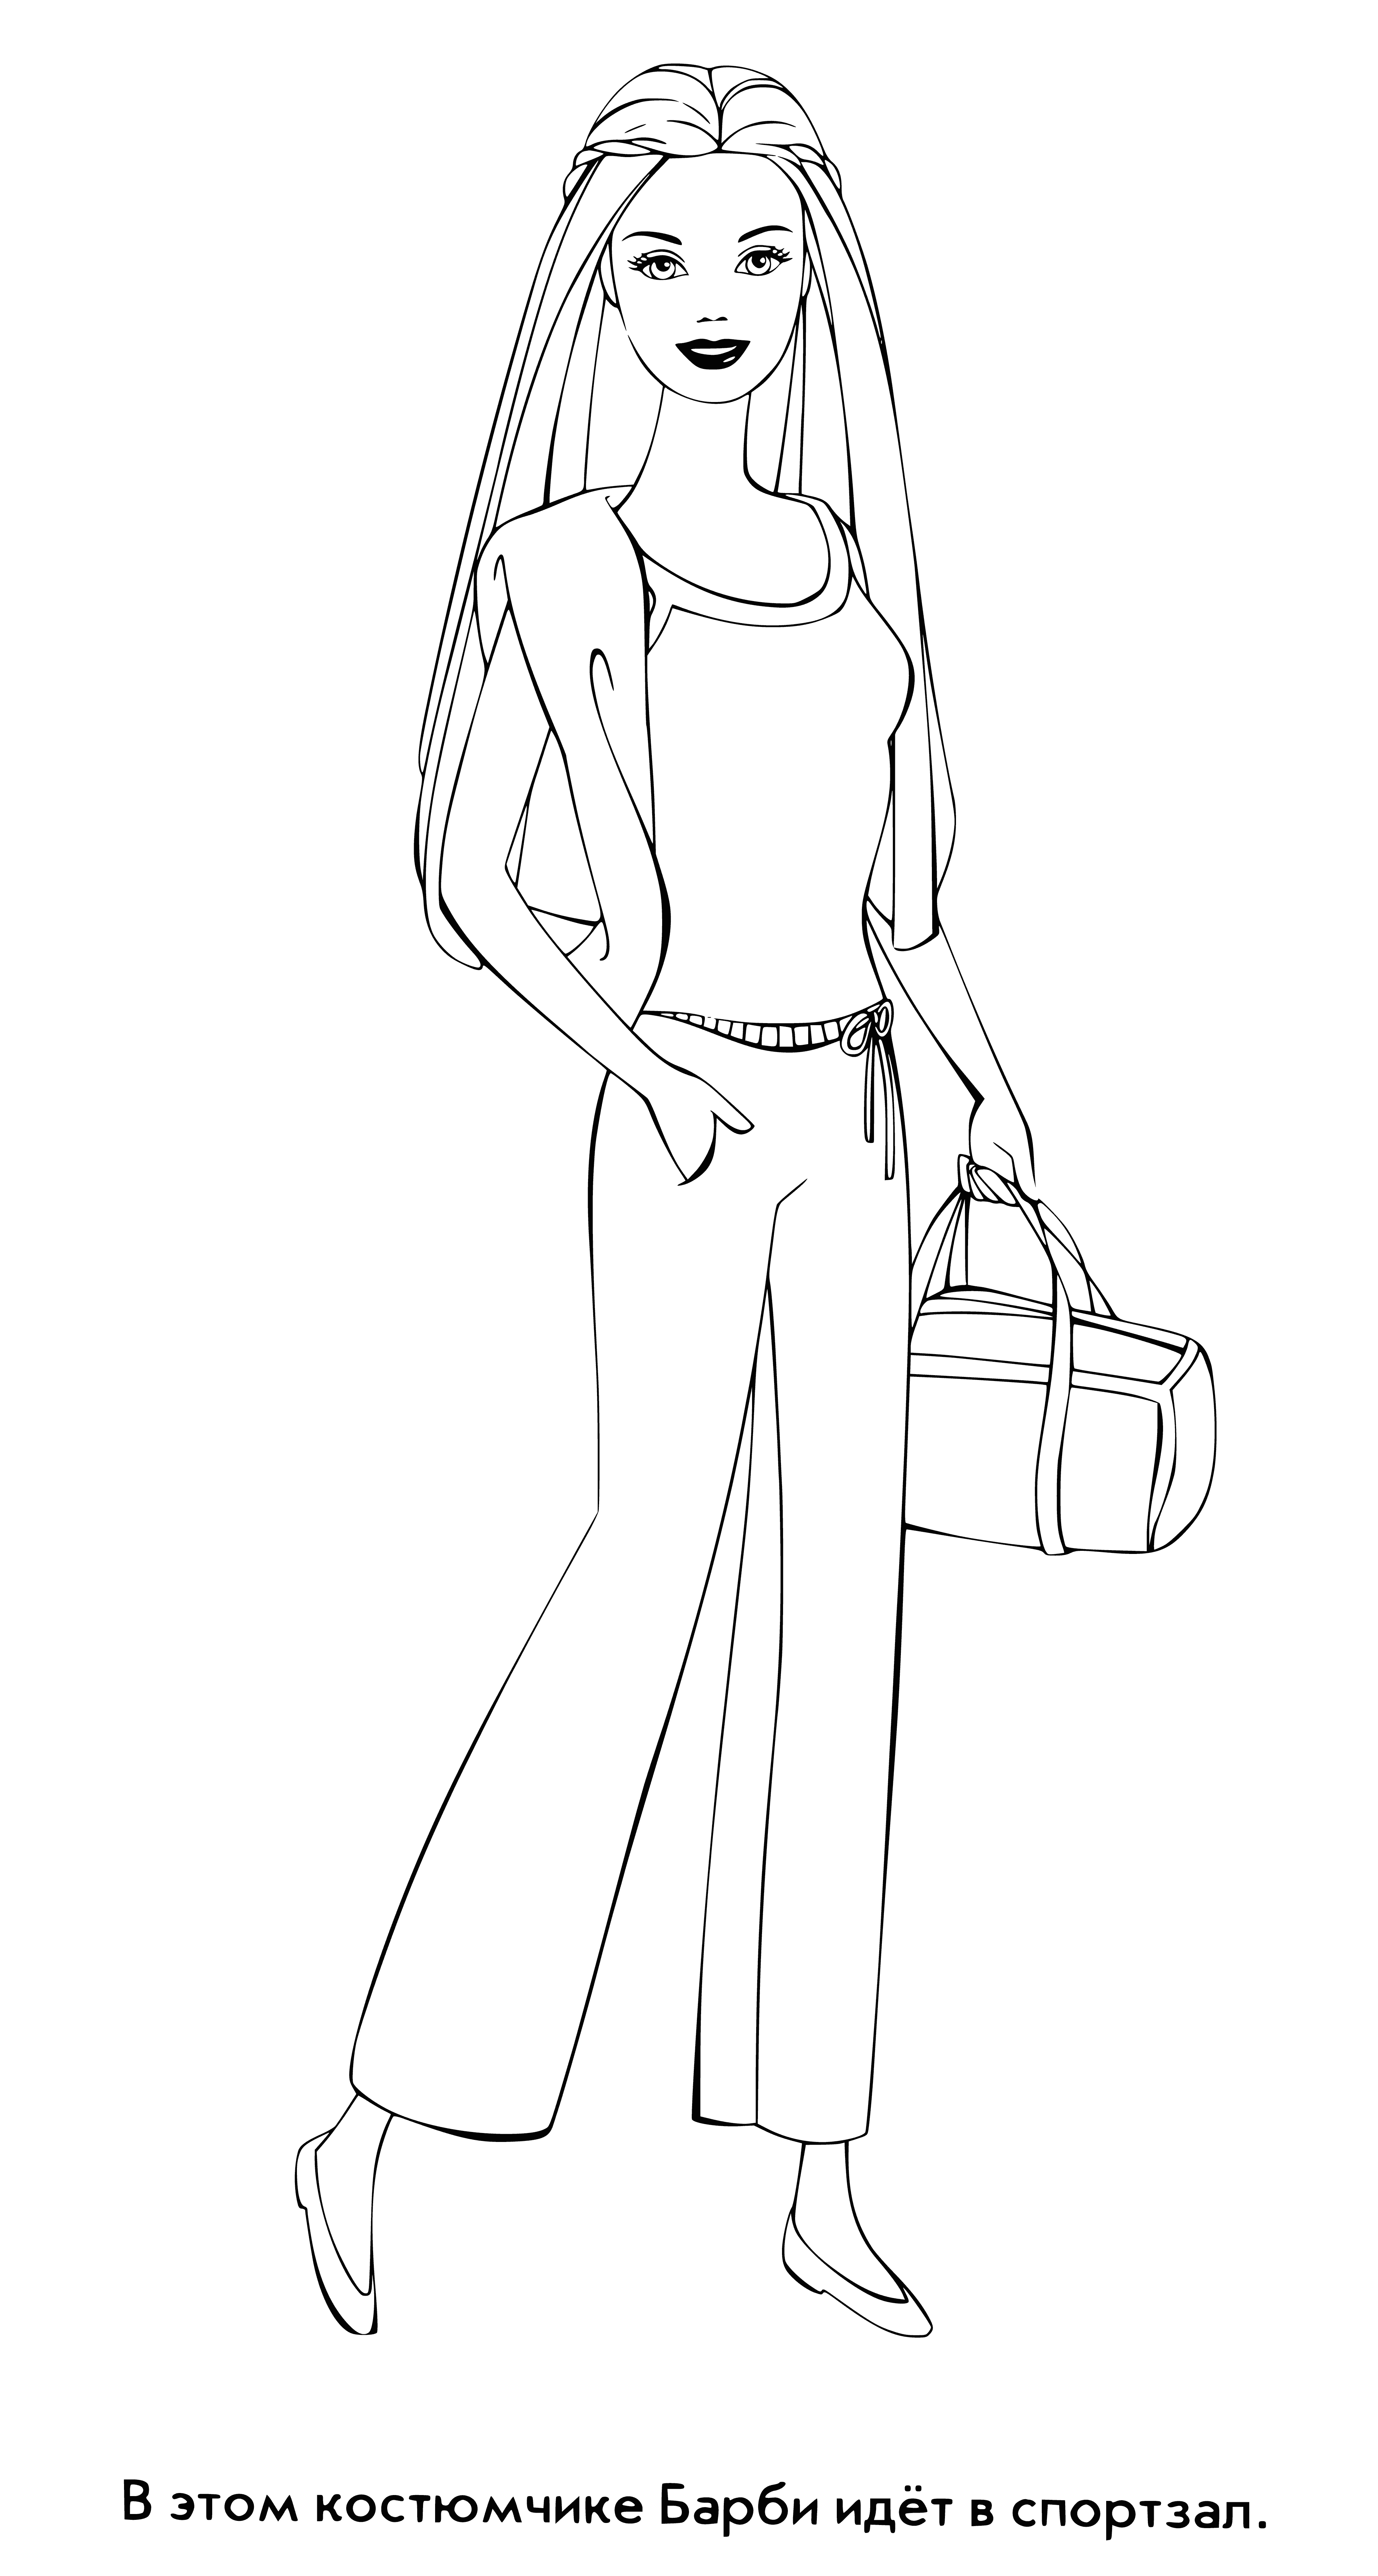 coloring page: Iconic Barbie doll cherished by girls for over 50 years; beautiful blonde with blue eyes wearing pink dress, pearl earrings and bracelet.